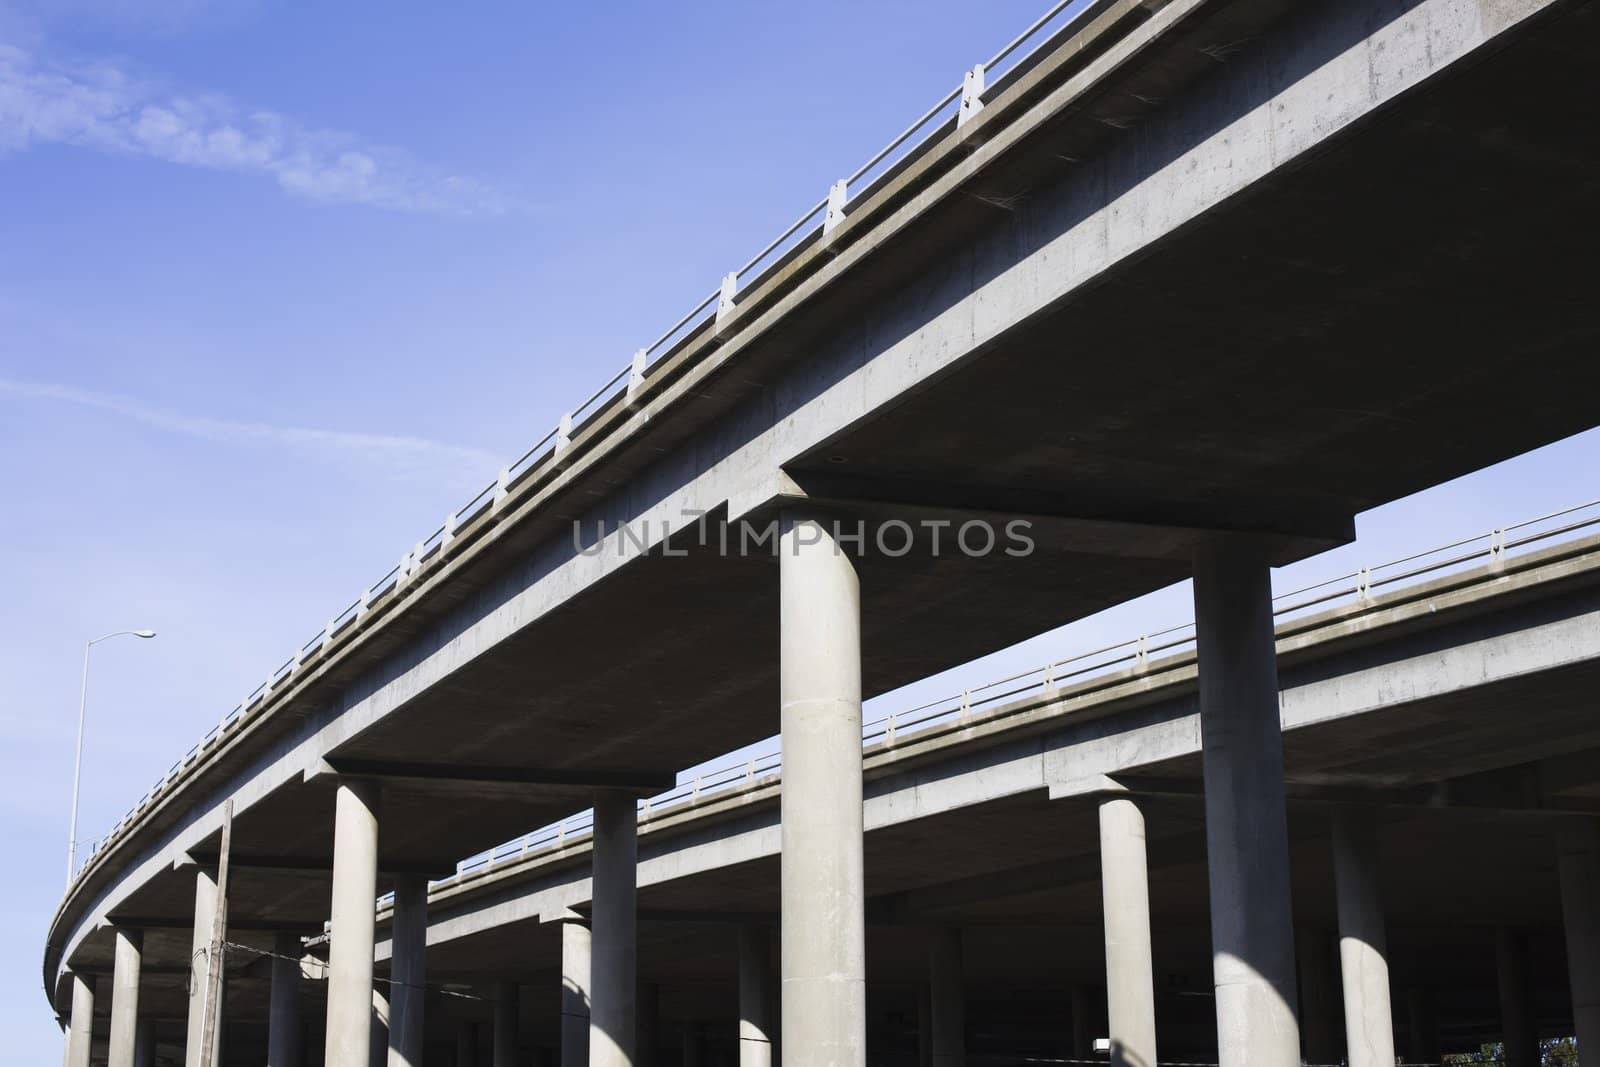 Contrasting Pillars of a Highway Overpass With a Bright Blue Sky